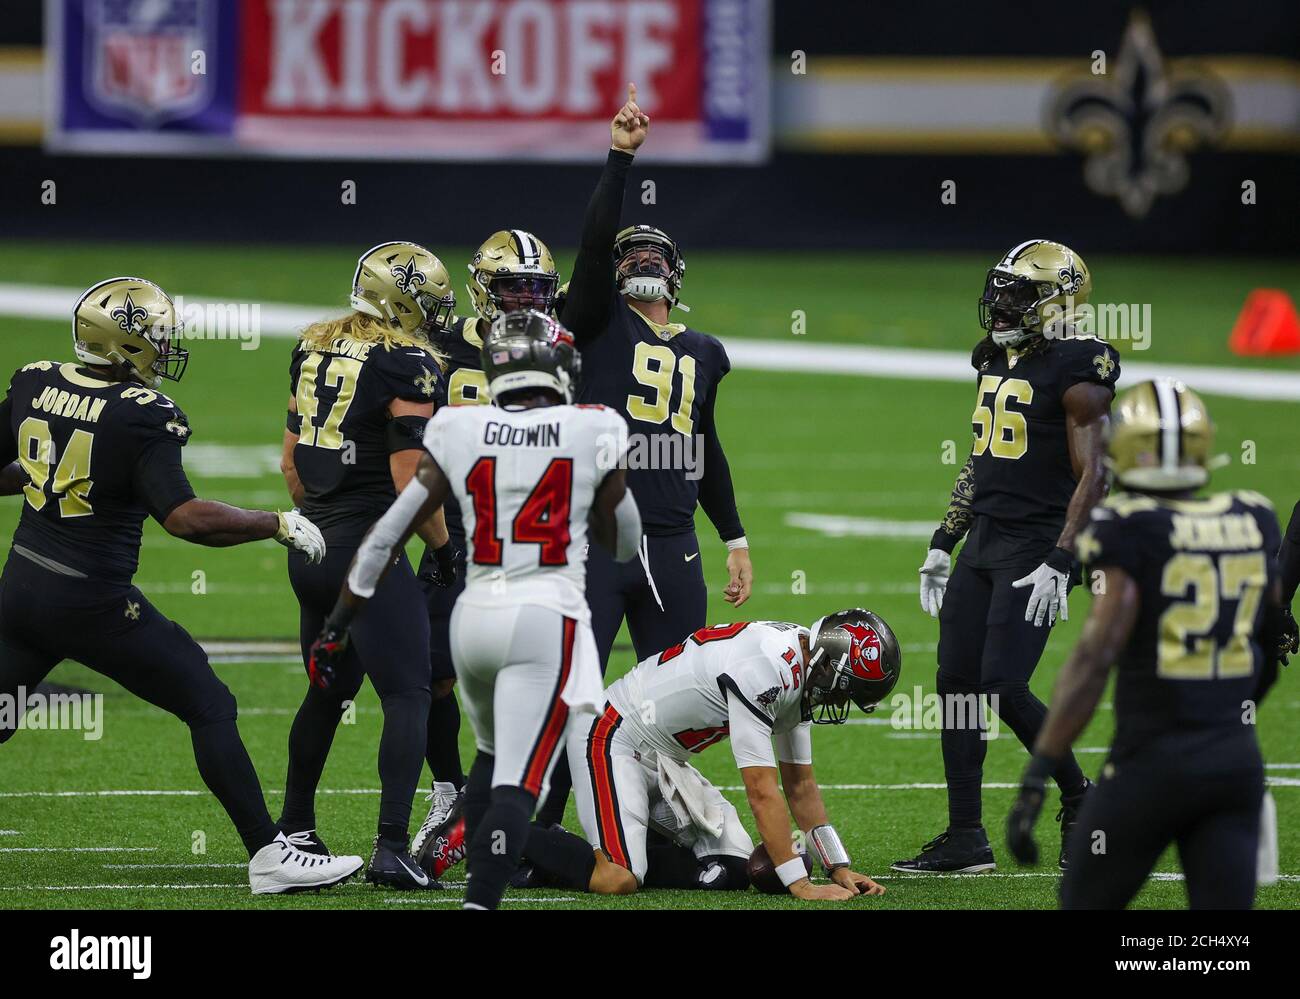 New Orleans, United States. 13th Sep, 2020. New Orleans Saints defensive end Trey Hendrickson (91) celebrates after sacking Tampa Bay Buccaneers quarterback Tom Brady (12) during the second quarter at the Mercedes-Benz Superdome in New Orleans on Sunday, September 13, 2020. Pool photo by Derick E. Hingle/UPI Credit: UPI/Alamy Live News Stock Photo